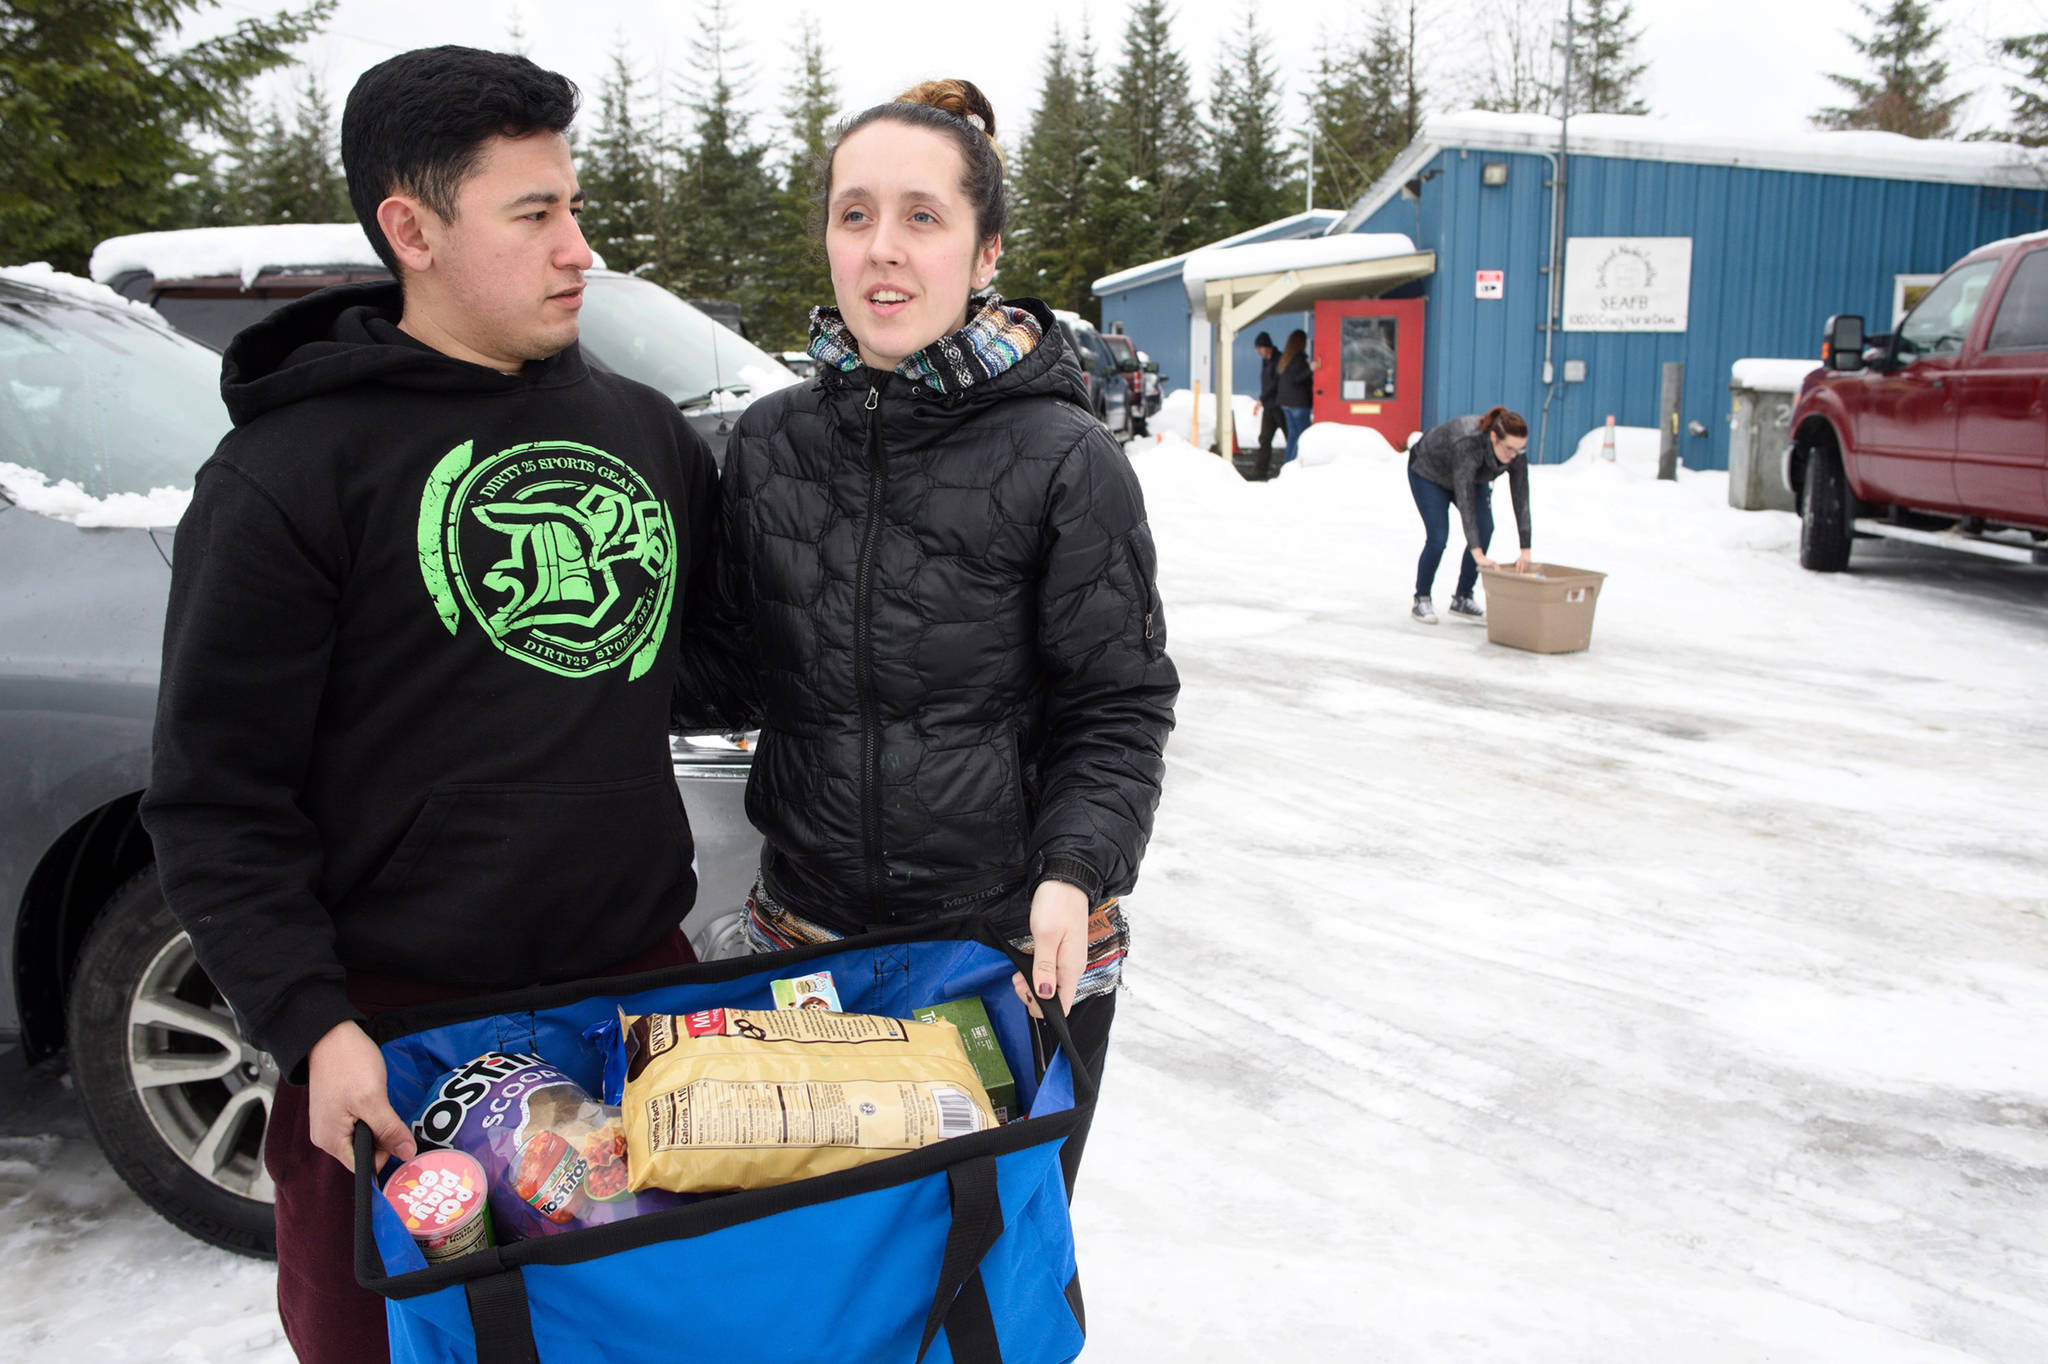 Jerry Arizpe and his wife, Jordan, hold a 33-pound bag of food they picked up at the Southeast Alaska Food Bank on Monday, Jan 21, 2019. Arizpe is a U.S. Coast Guardsman at Station Juneau and is not currently receiving a paycheck because of the partial federal shutdown. (Michael Penn | Juneau Empire)